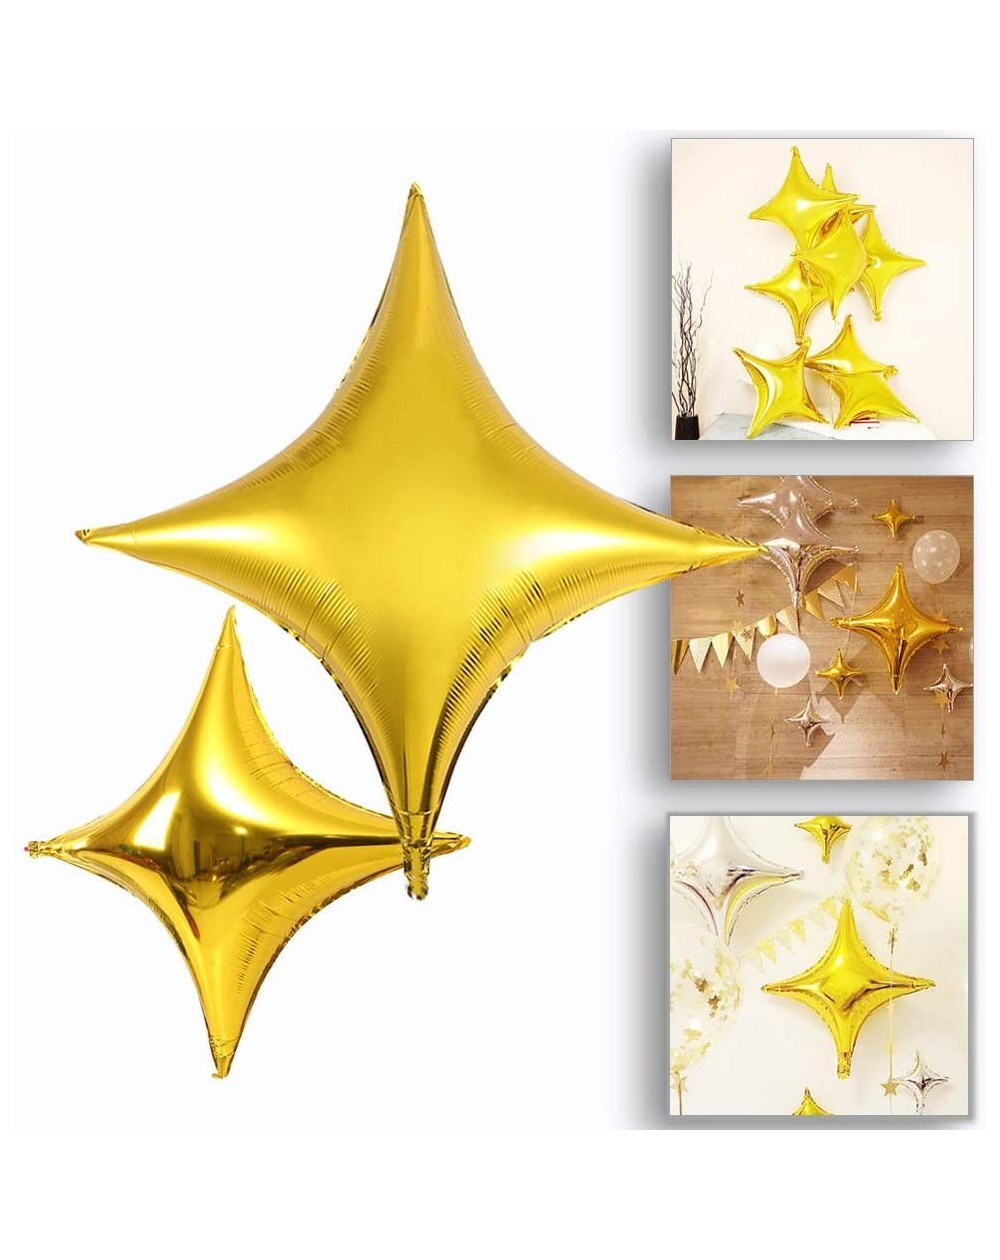 Balloons 24inch Gold Star Balloons Hangable Four Angle Star Shape Foil Mylar Balloons - 12pcs - Four Angle Star-24in-gold-12p...